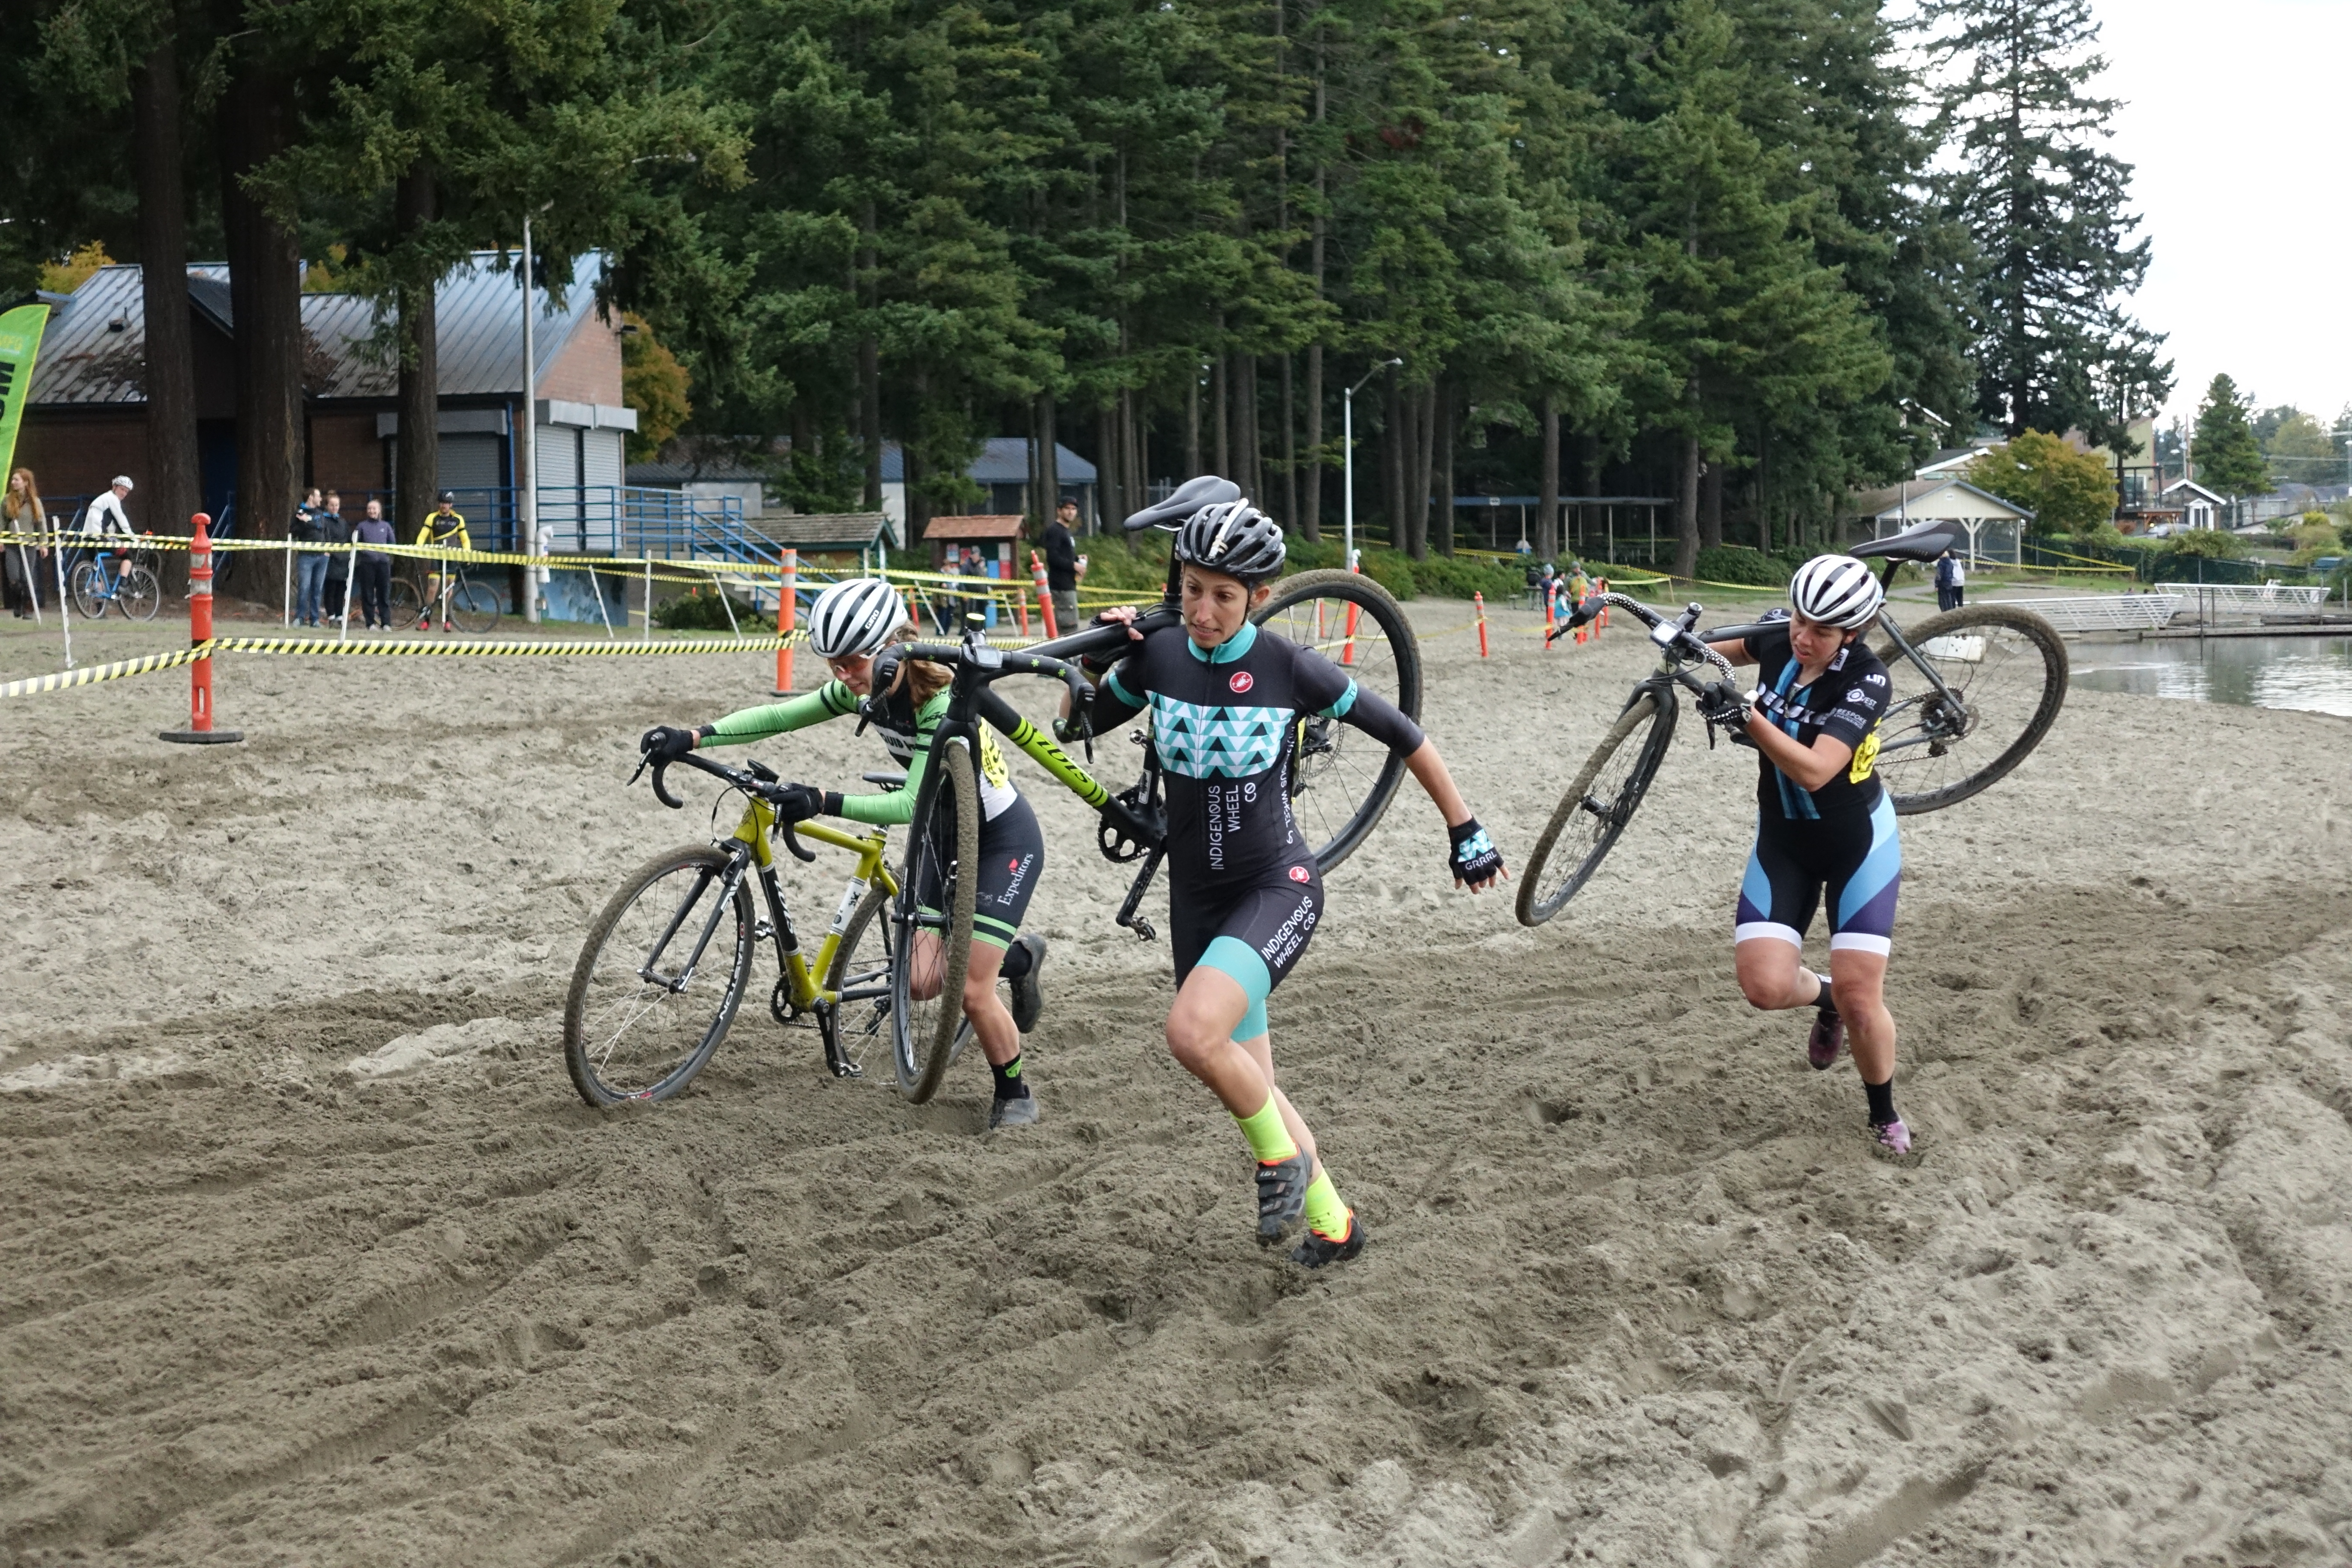 These elite women opted to dismount across the final stretch of sand.